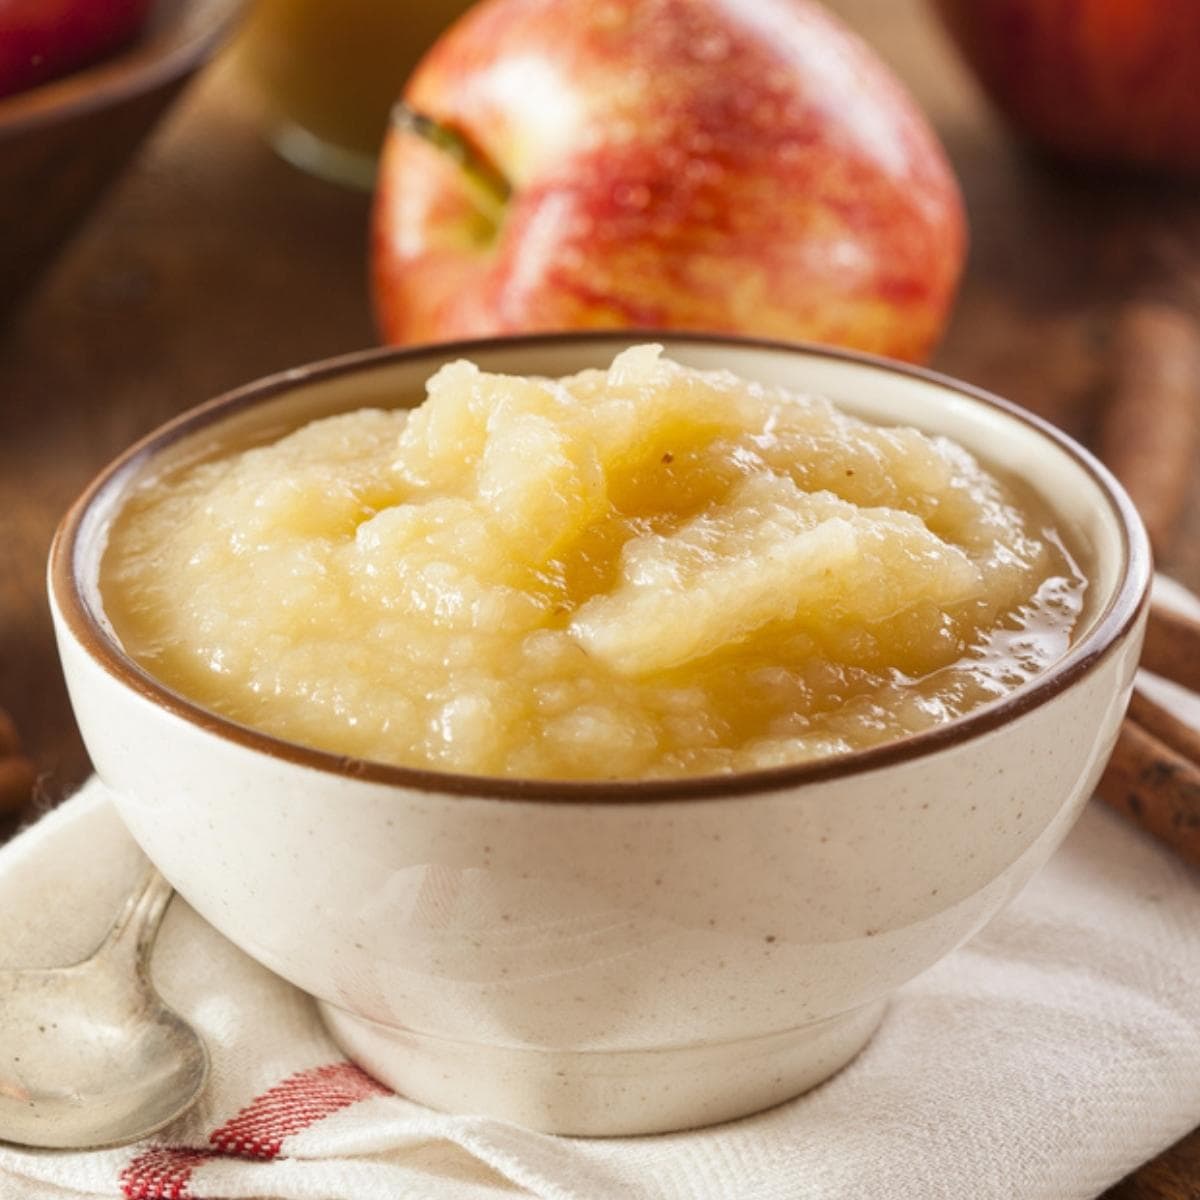 Applesauce in a small bowl